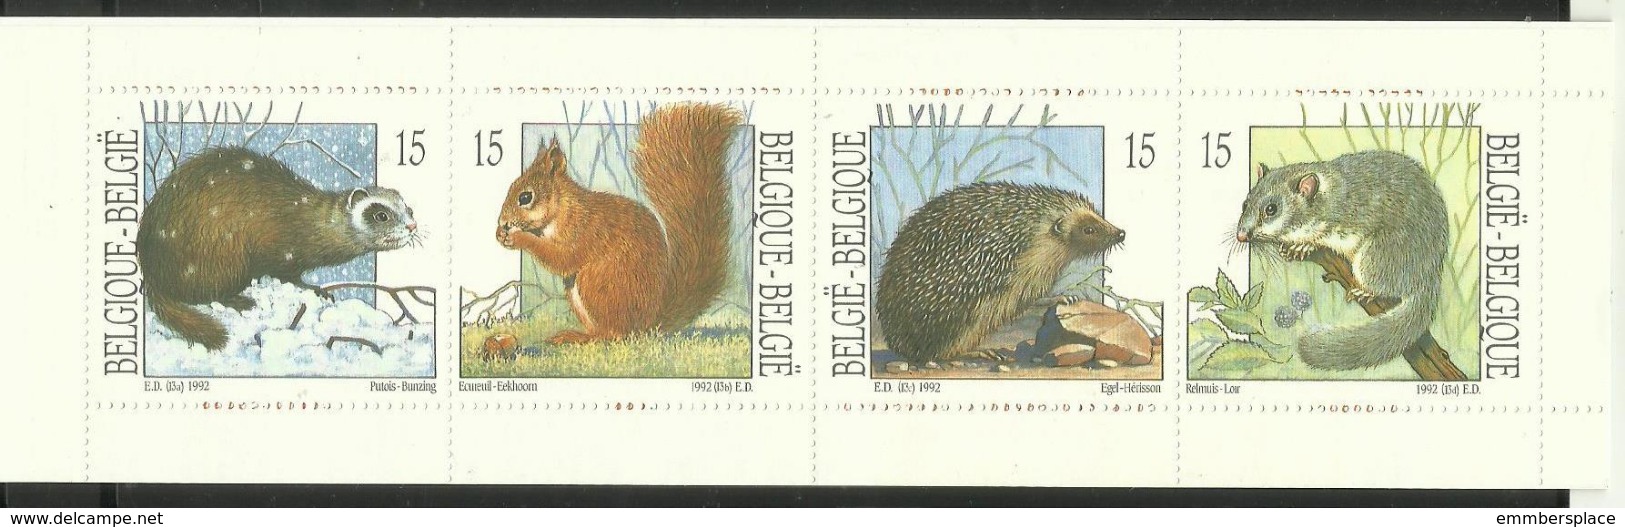 Belgium - 1992 Rodents Booklet Complete  MNH **    Sc 1465a - Unclassified